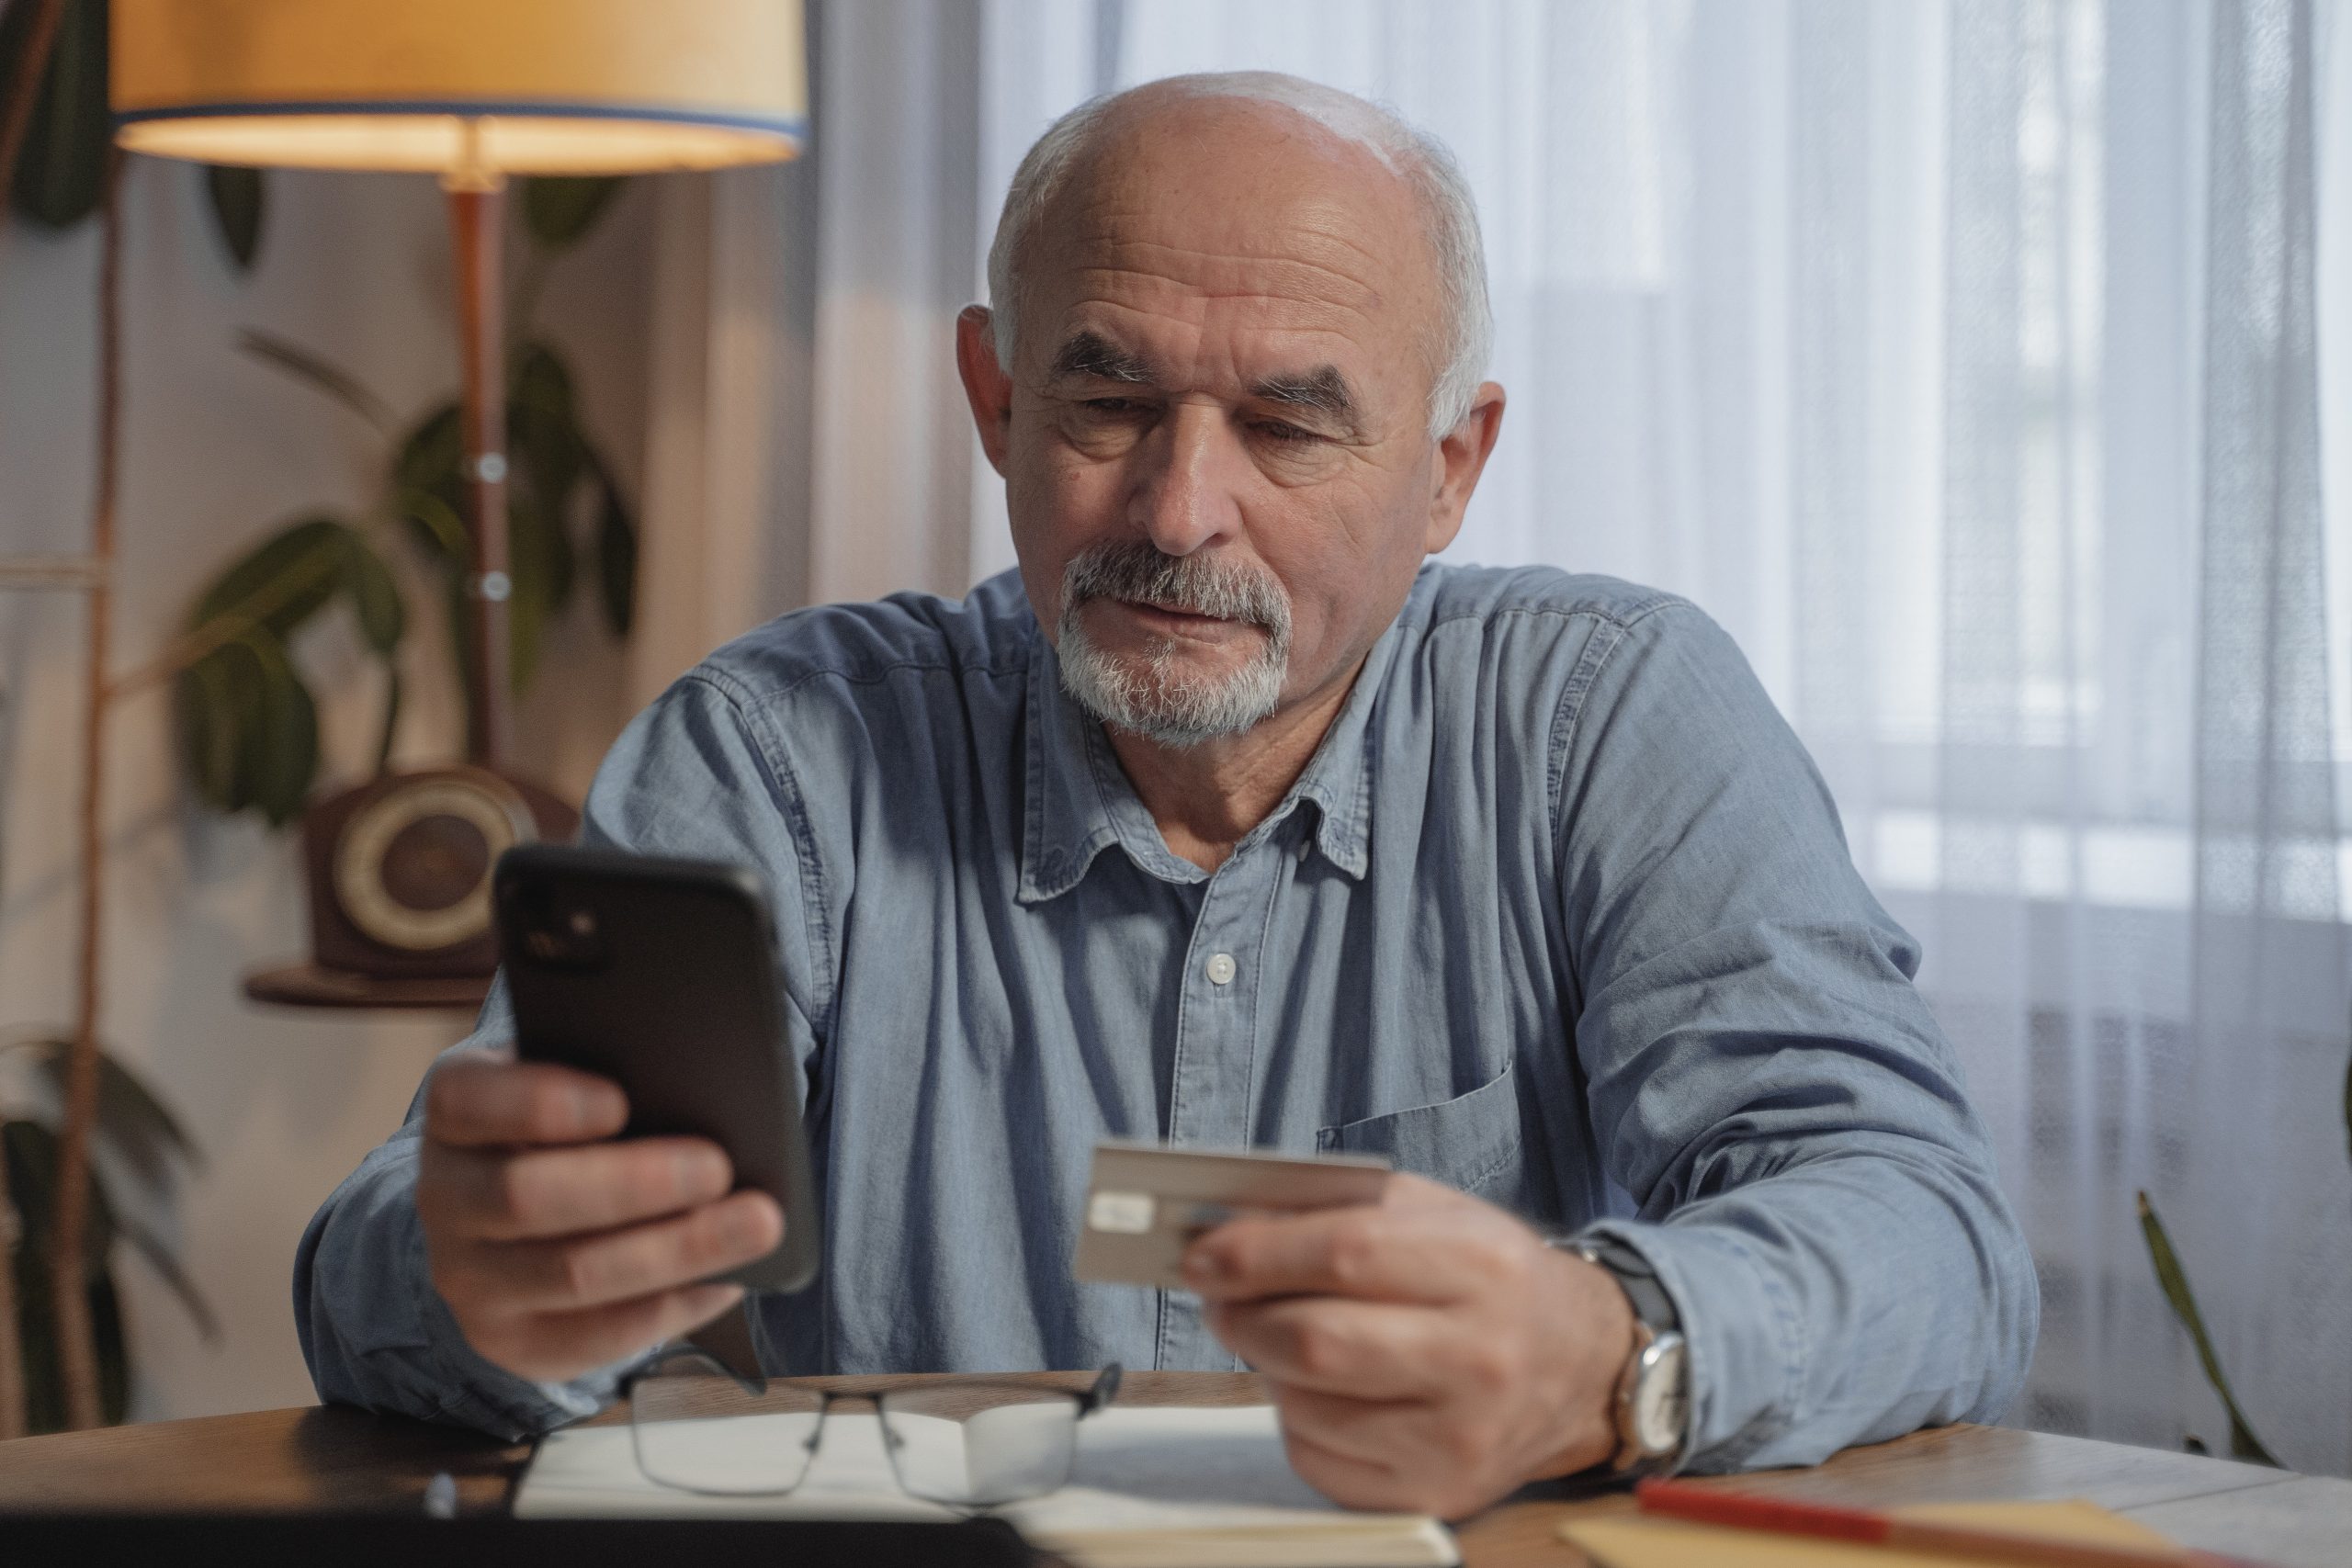 Home Equity Line Of Credit - HELOC - man sitting at table looking at phone